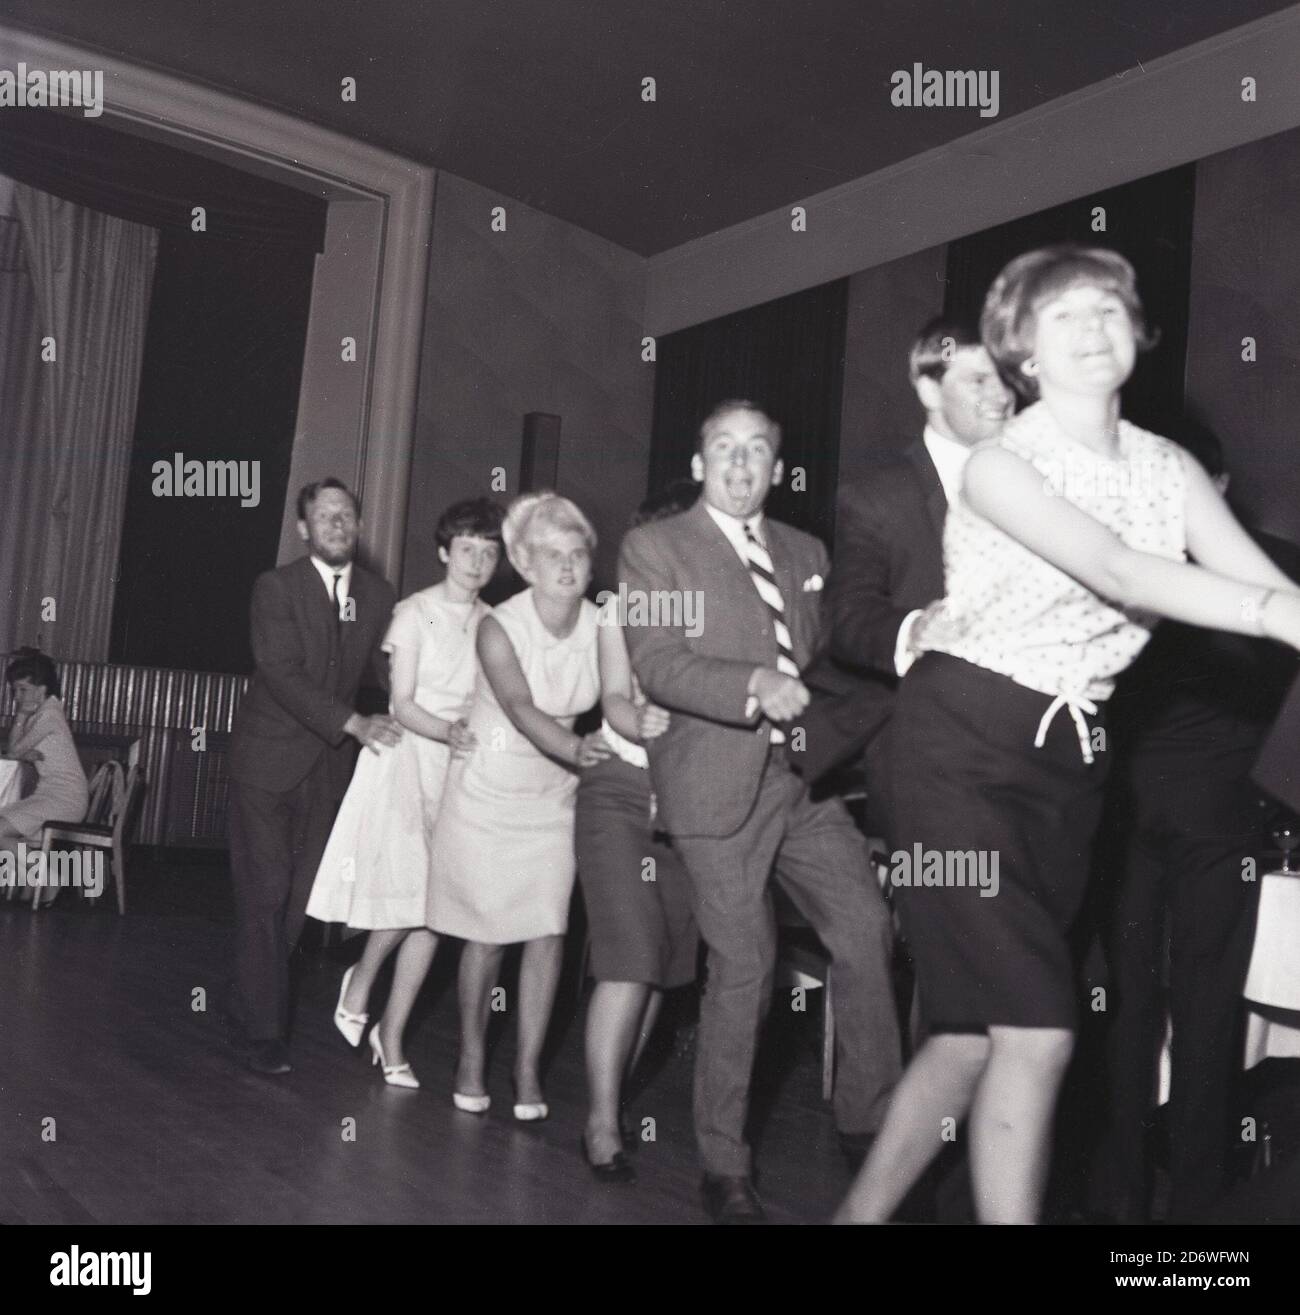 1969, historical, a night  out....evening time and at a party in a large function hall, a number of the guests having fun dancing the conga, a novelty line dance orginating from the Cuban carnival dance and popular in the 1930a and 1950s. Stock Photo